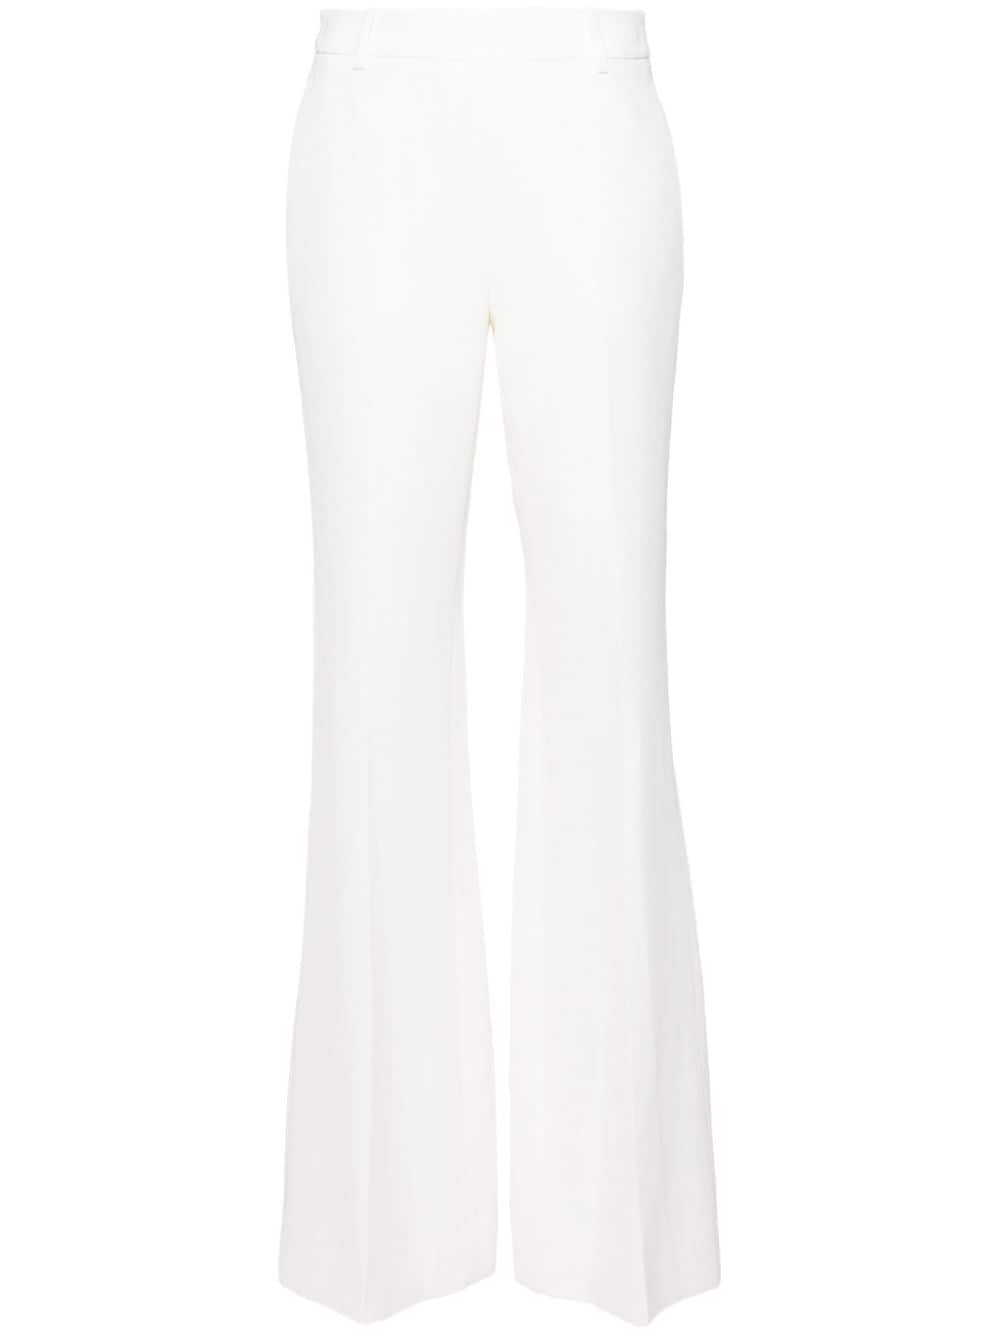 pressed-crease bootcut trousers